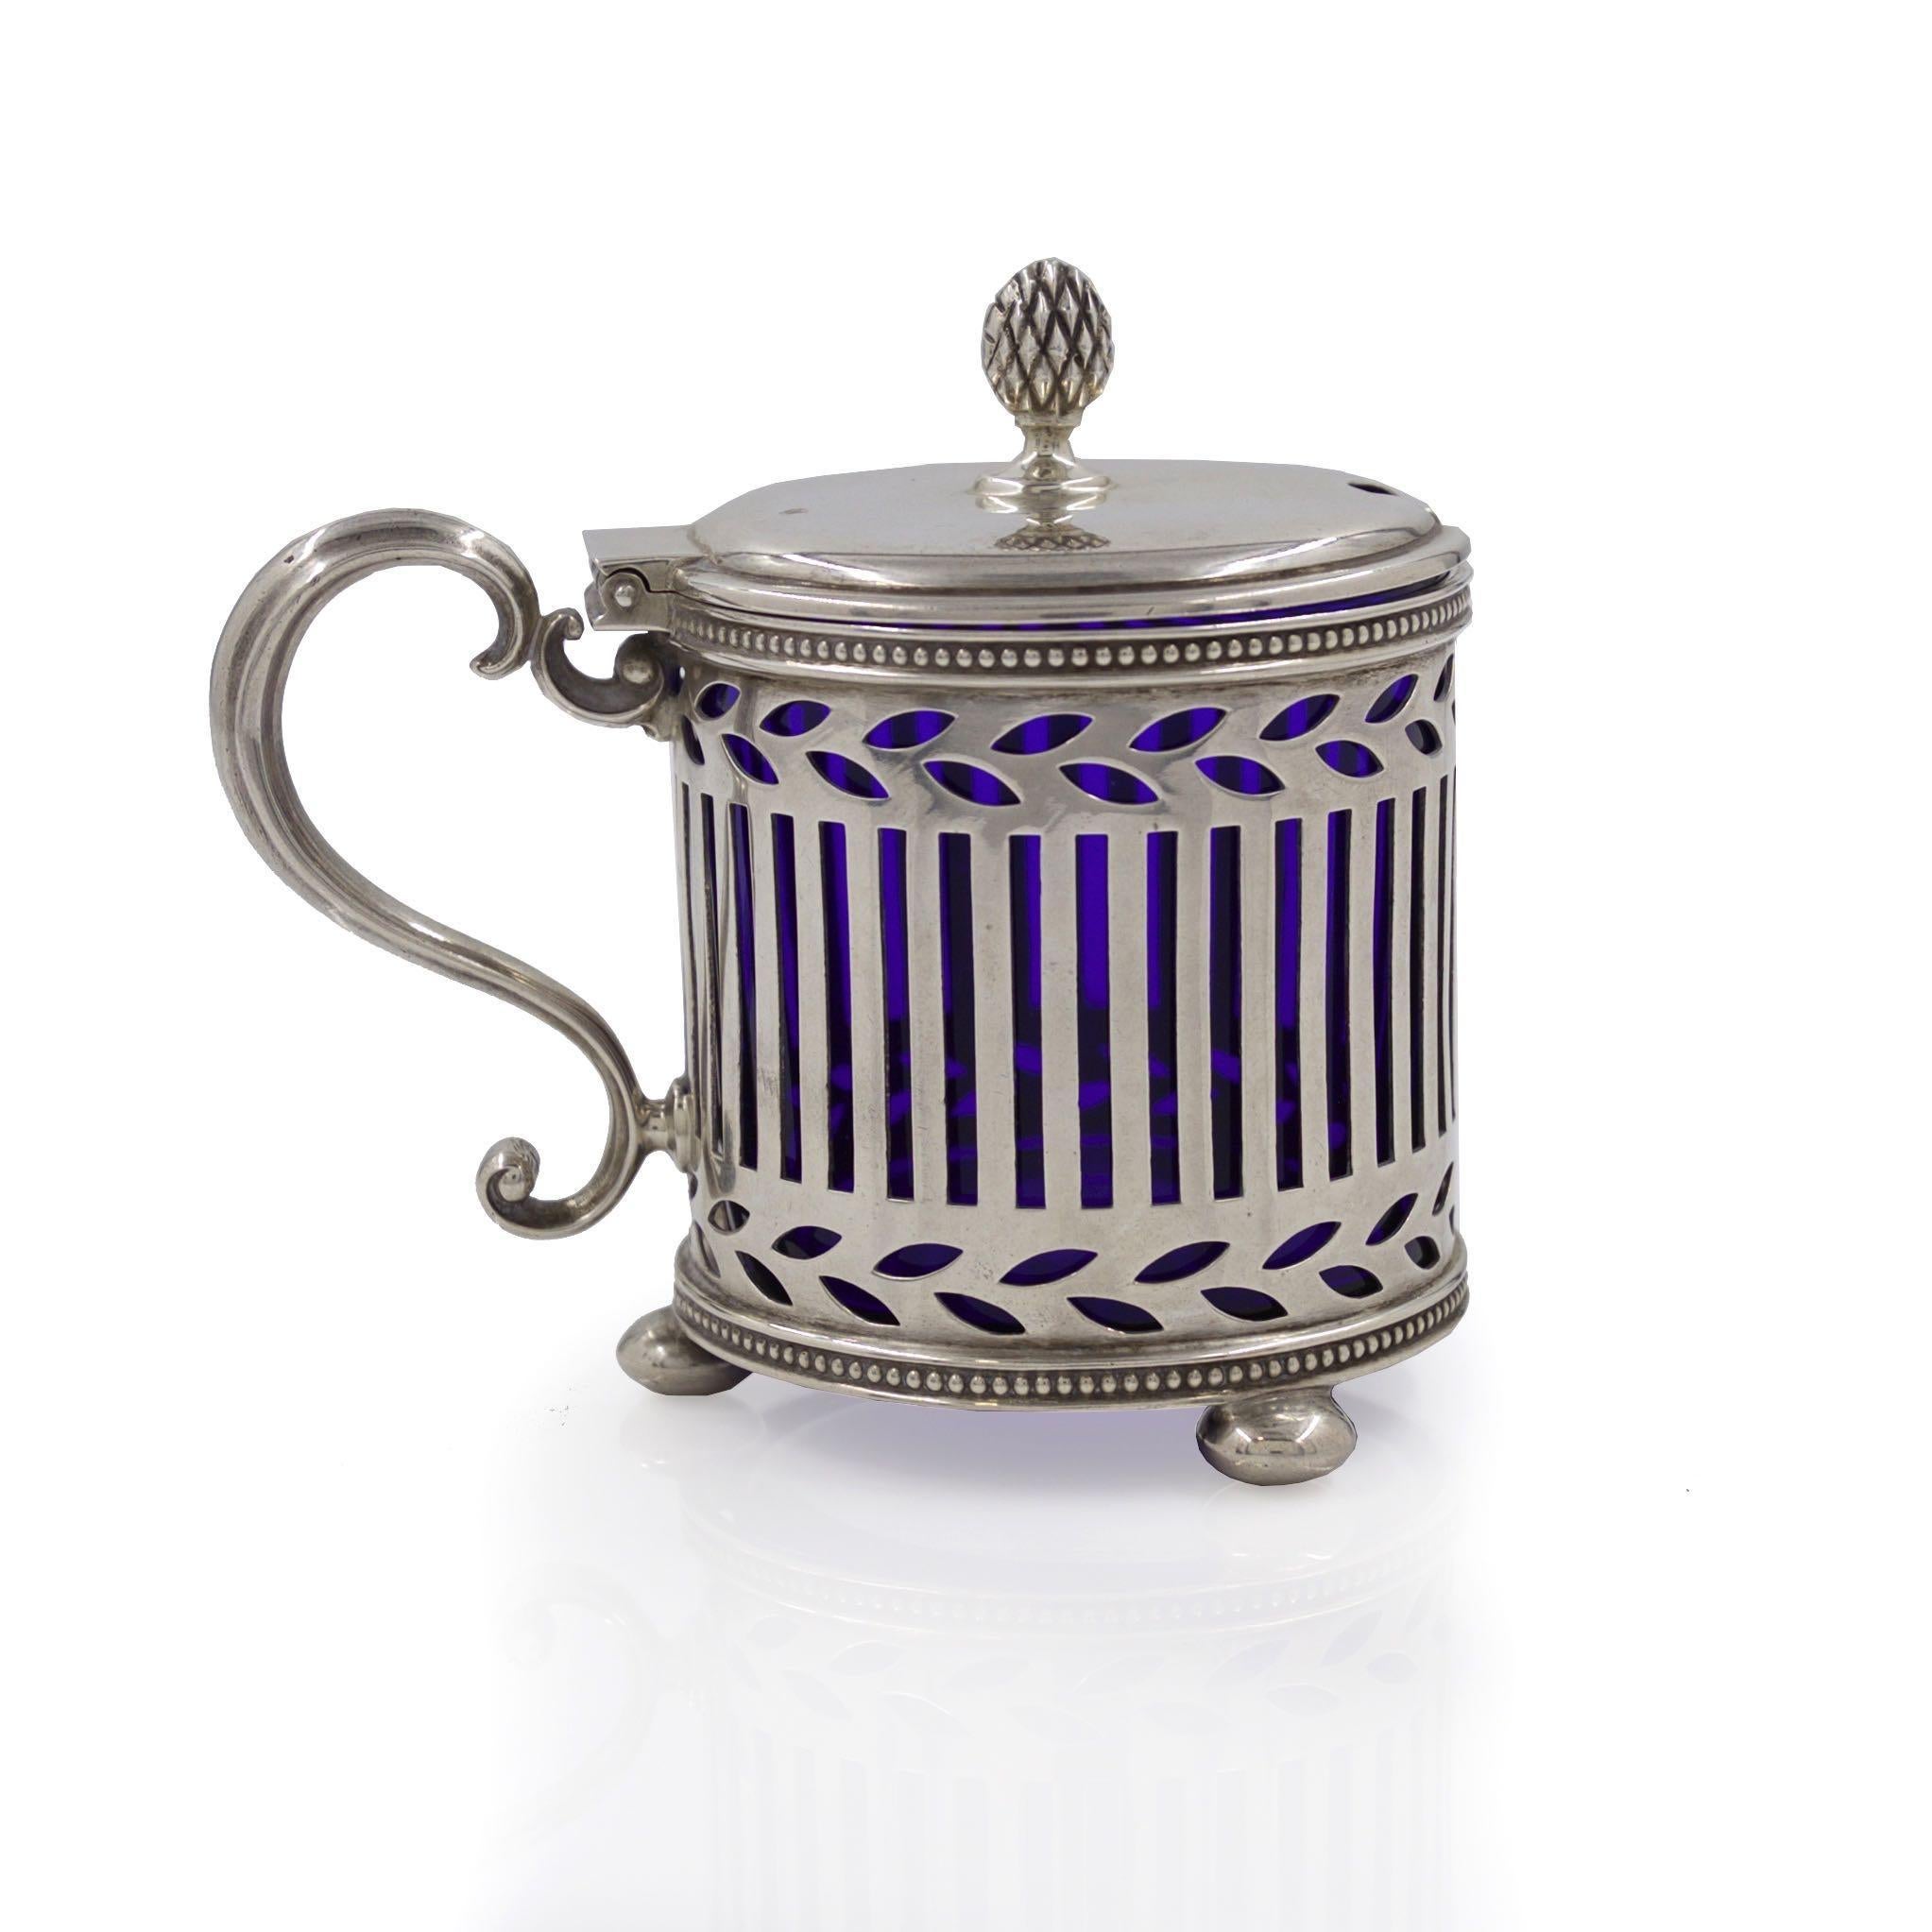 A gorgeous early 20th century mustard pot by Tiffany & Co, it retains the original removable cobalt-blue glass insert and remains in pristine original condition without any added monograms or any surface alterations. It features a nicely cast